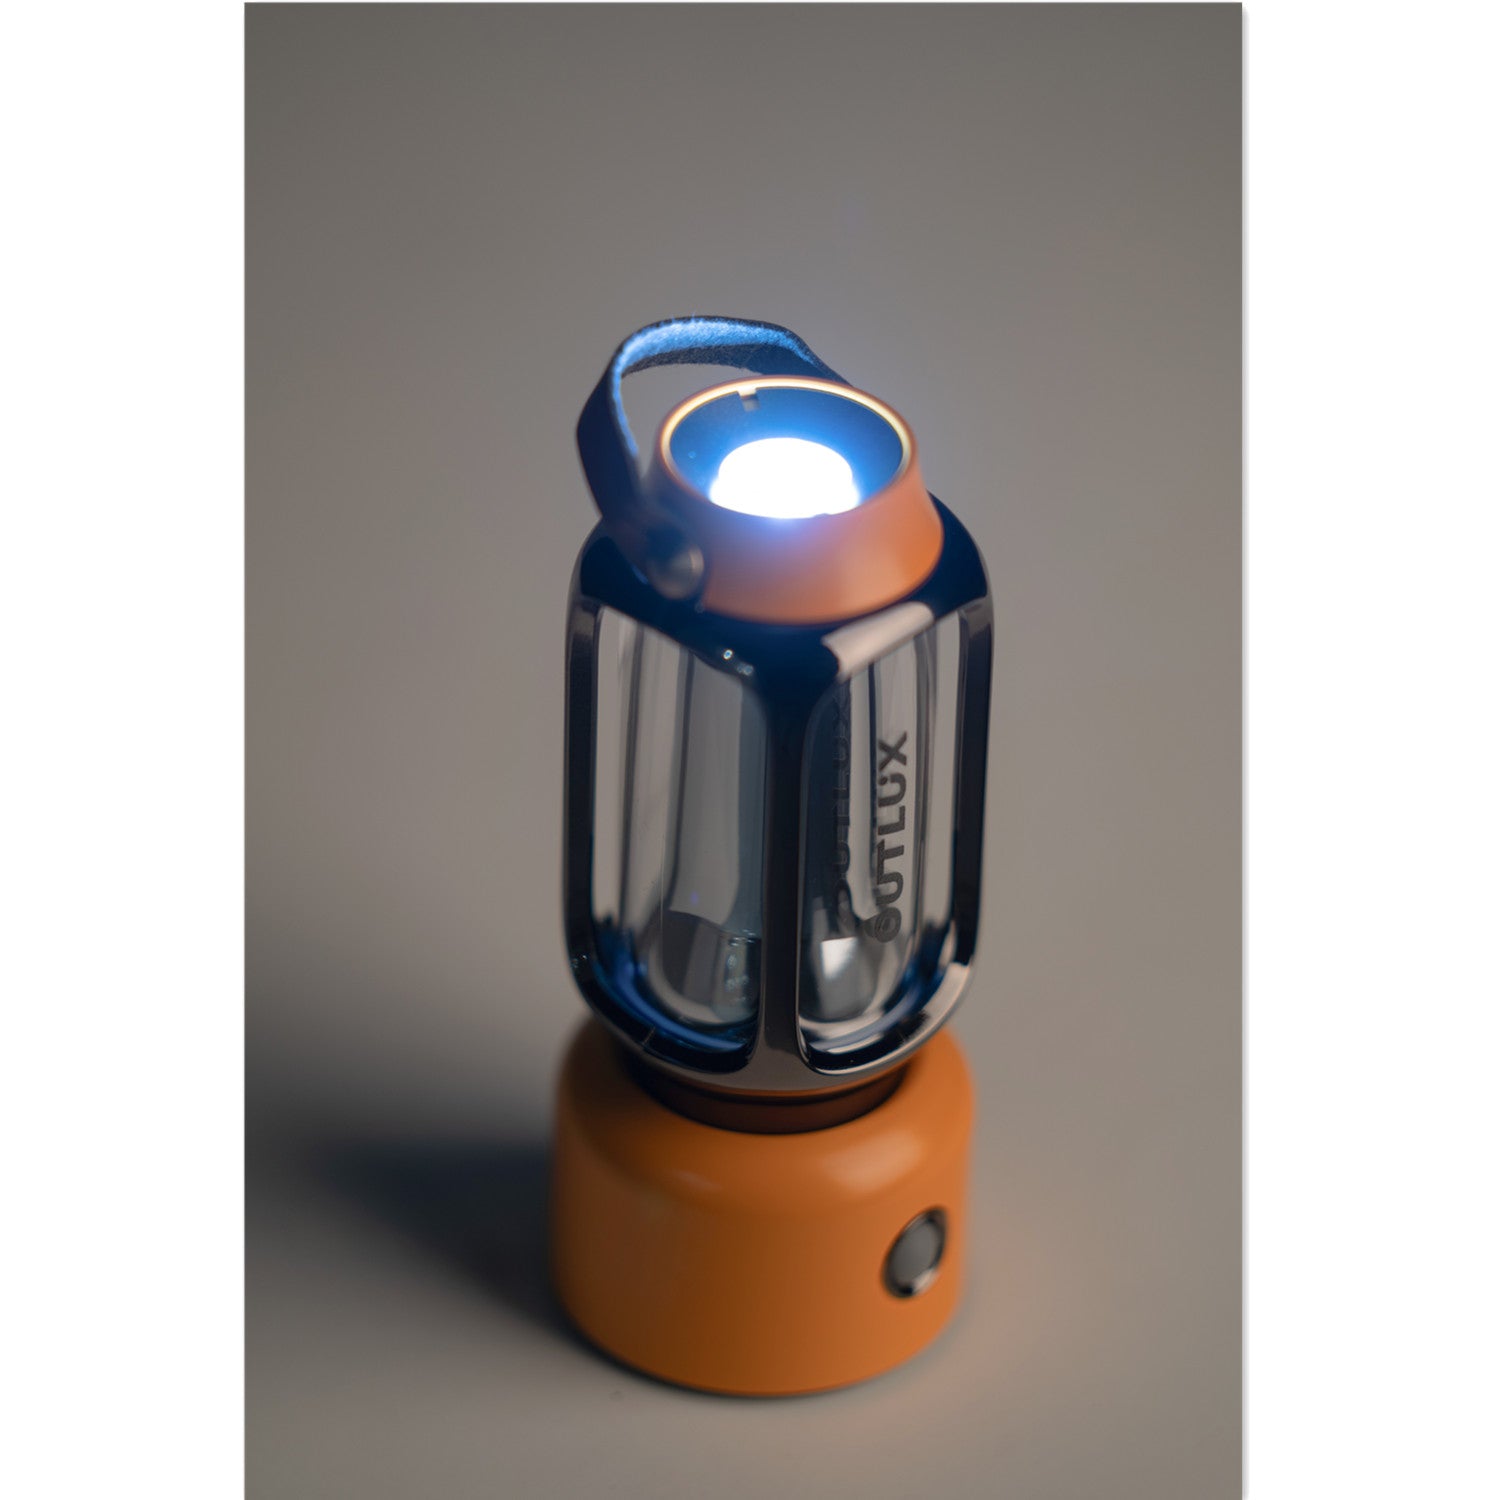 OUTLUX Multi-function Camping Lamp